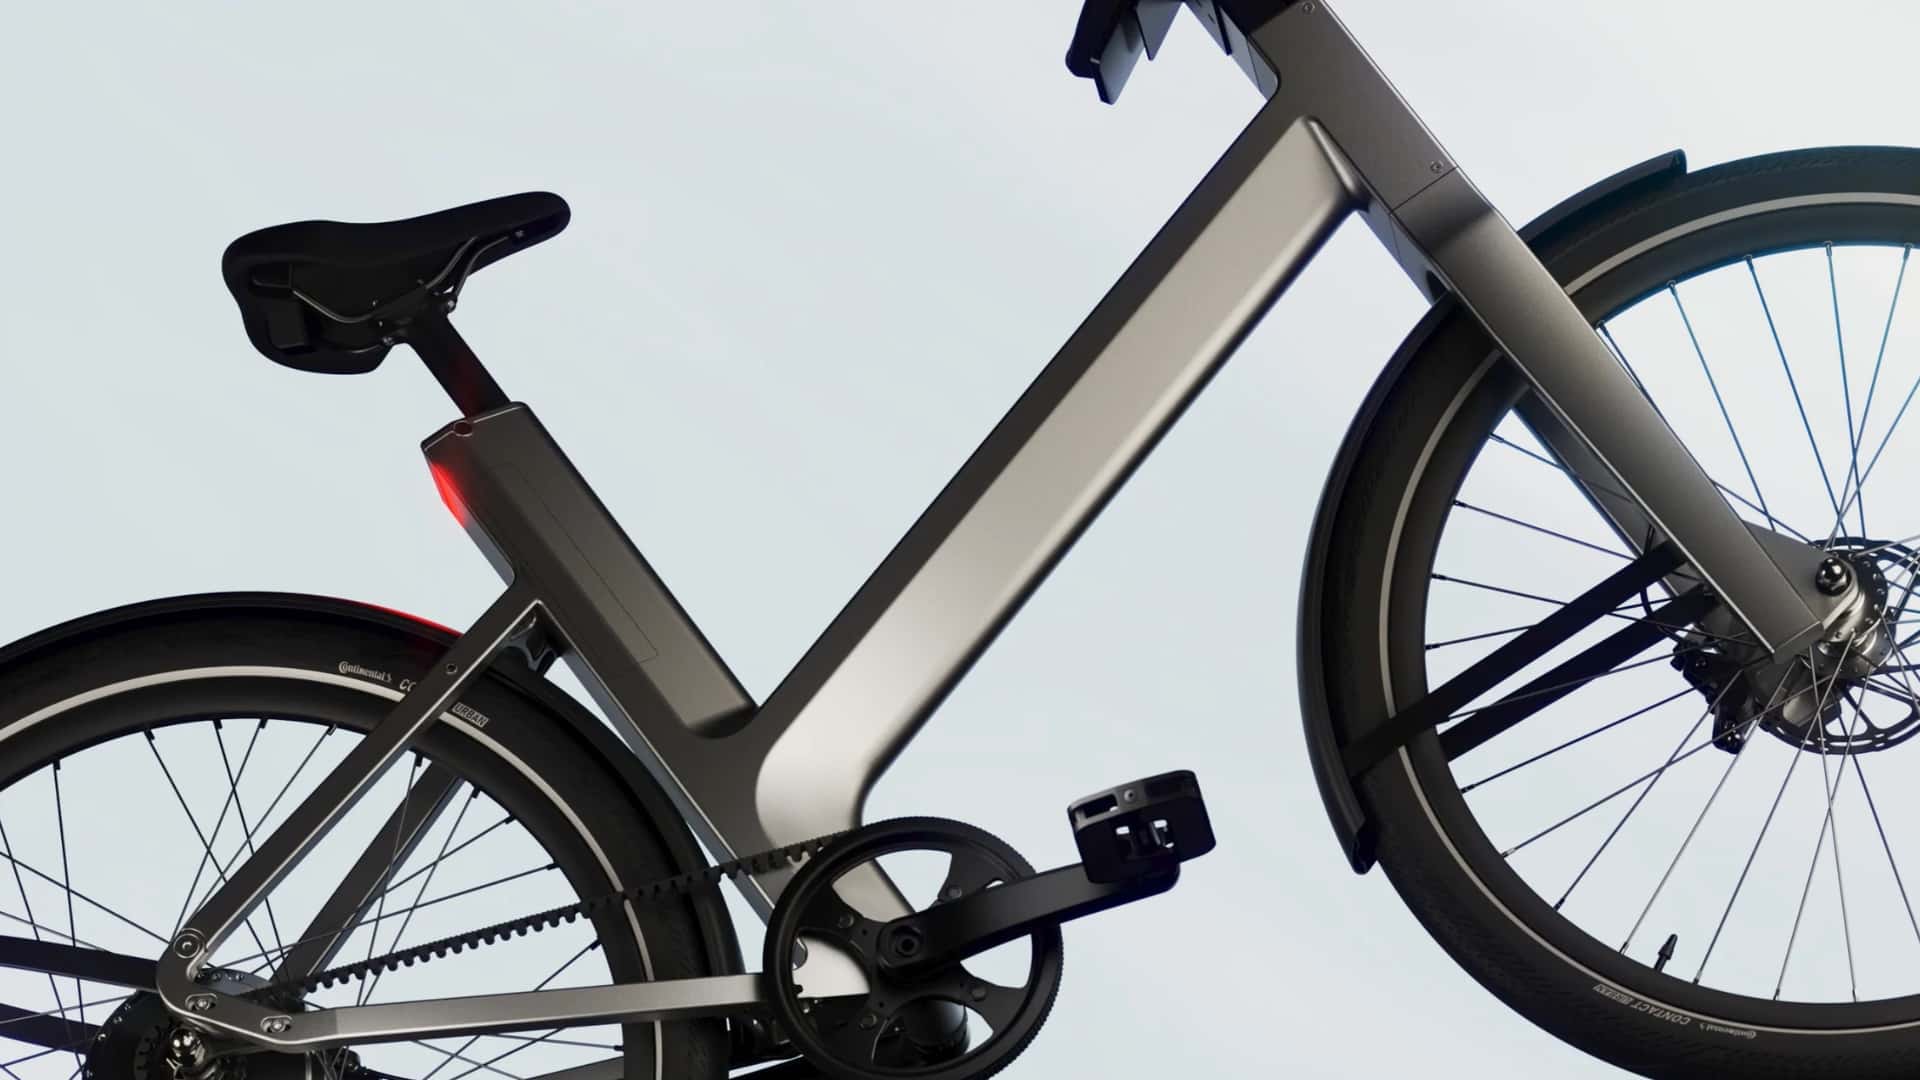 anod hybrid e-bike combines supercapacitors and lithium-ion batteries